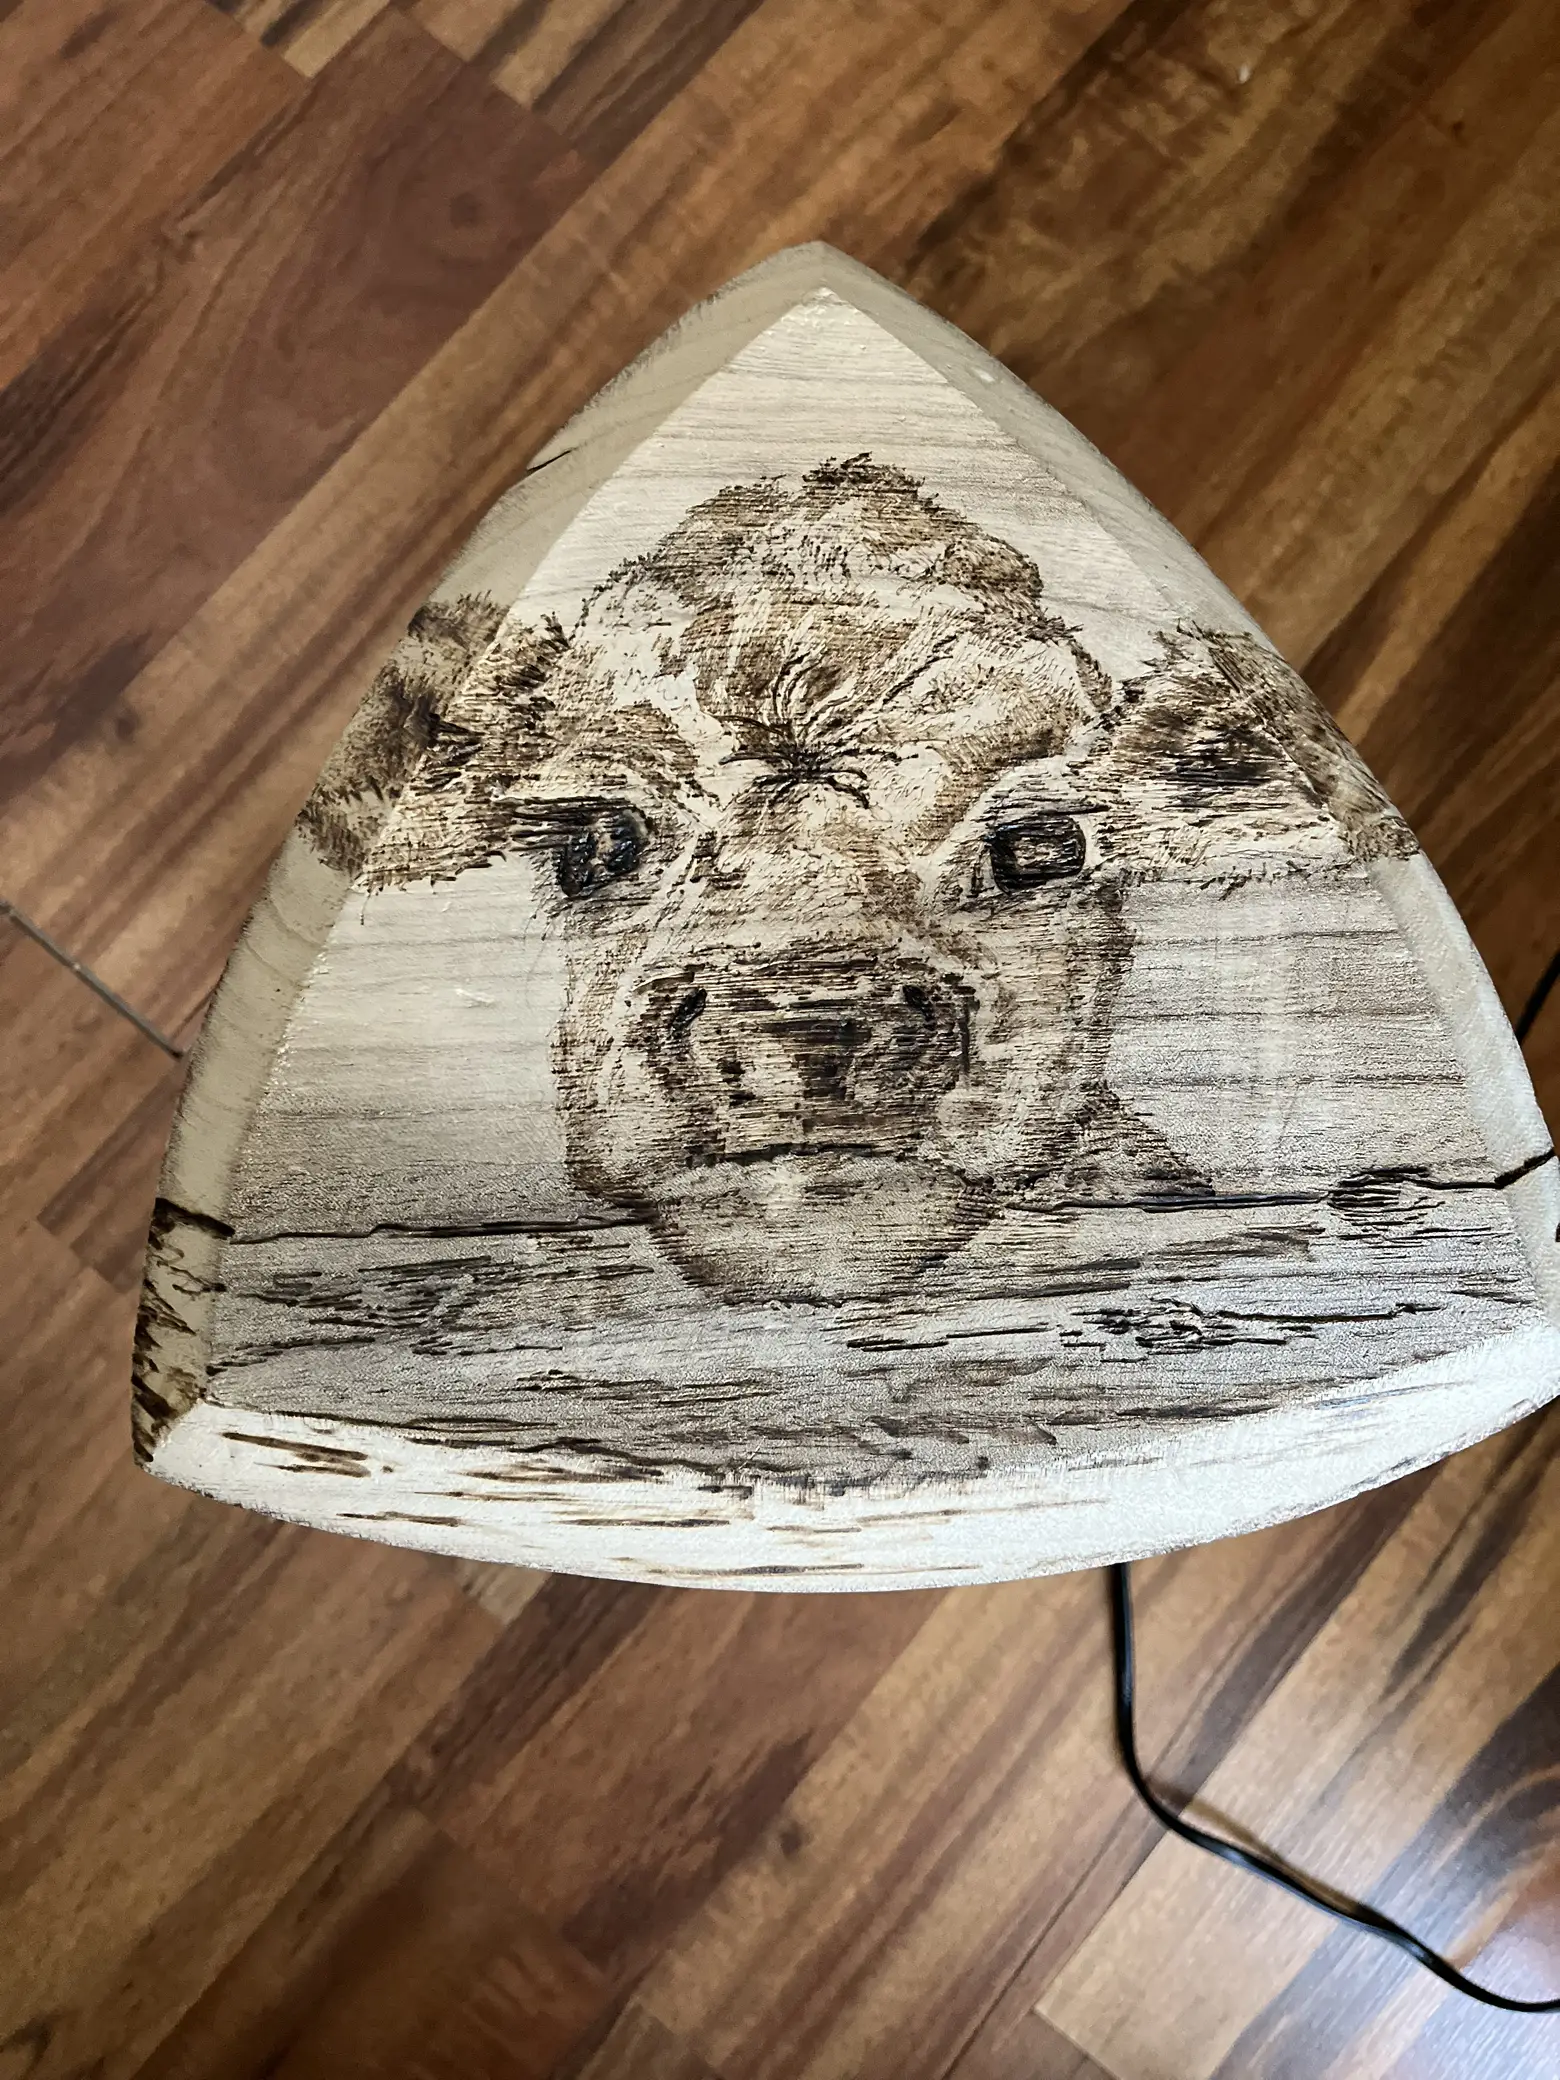 Wood burning on a Stool, Gallery posted by Gena Bzovi